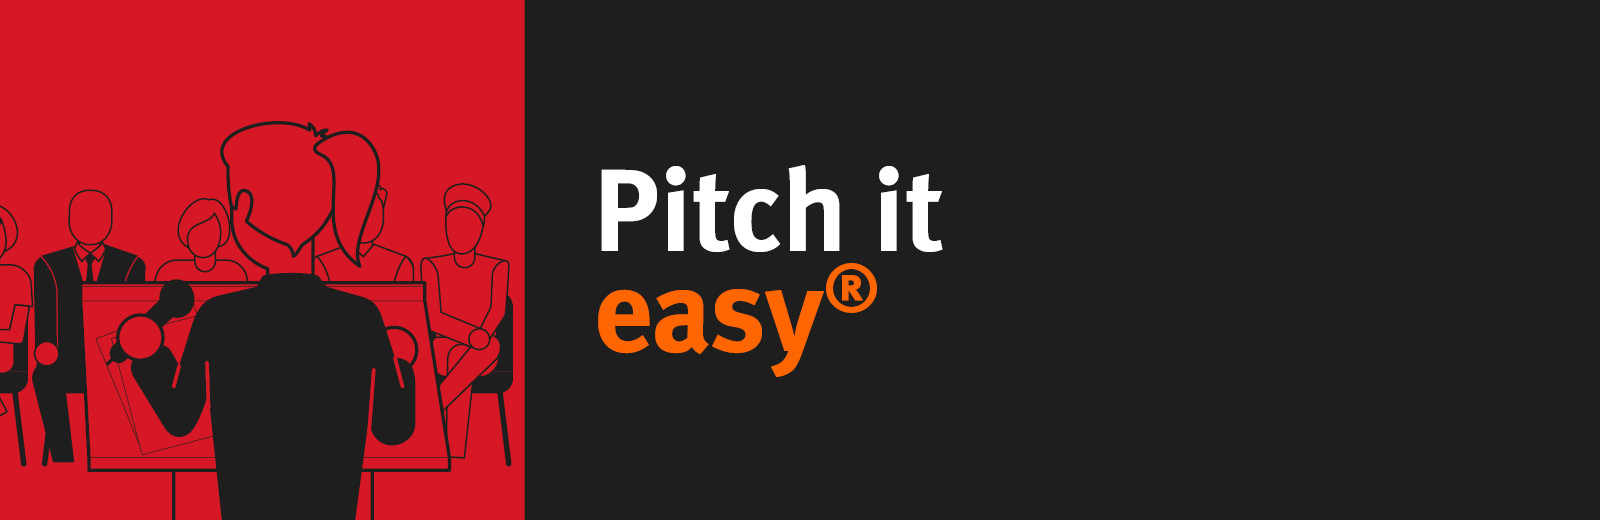 Bayes Pitch it easy competition